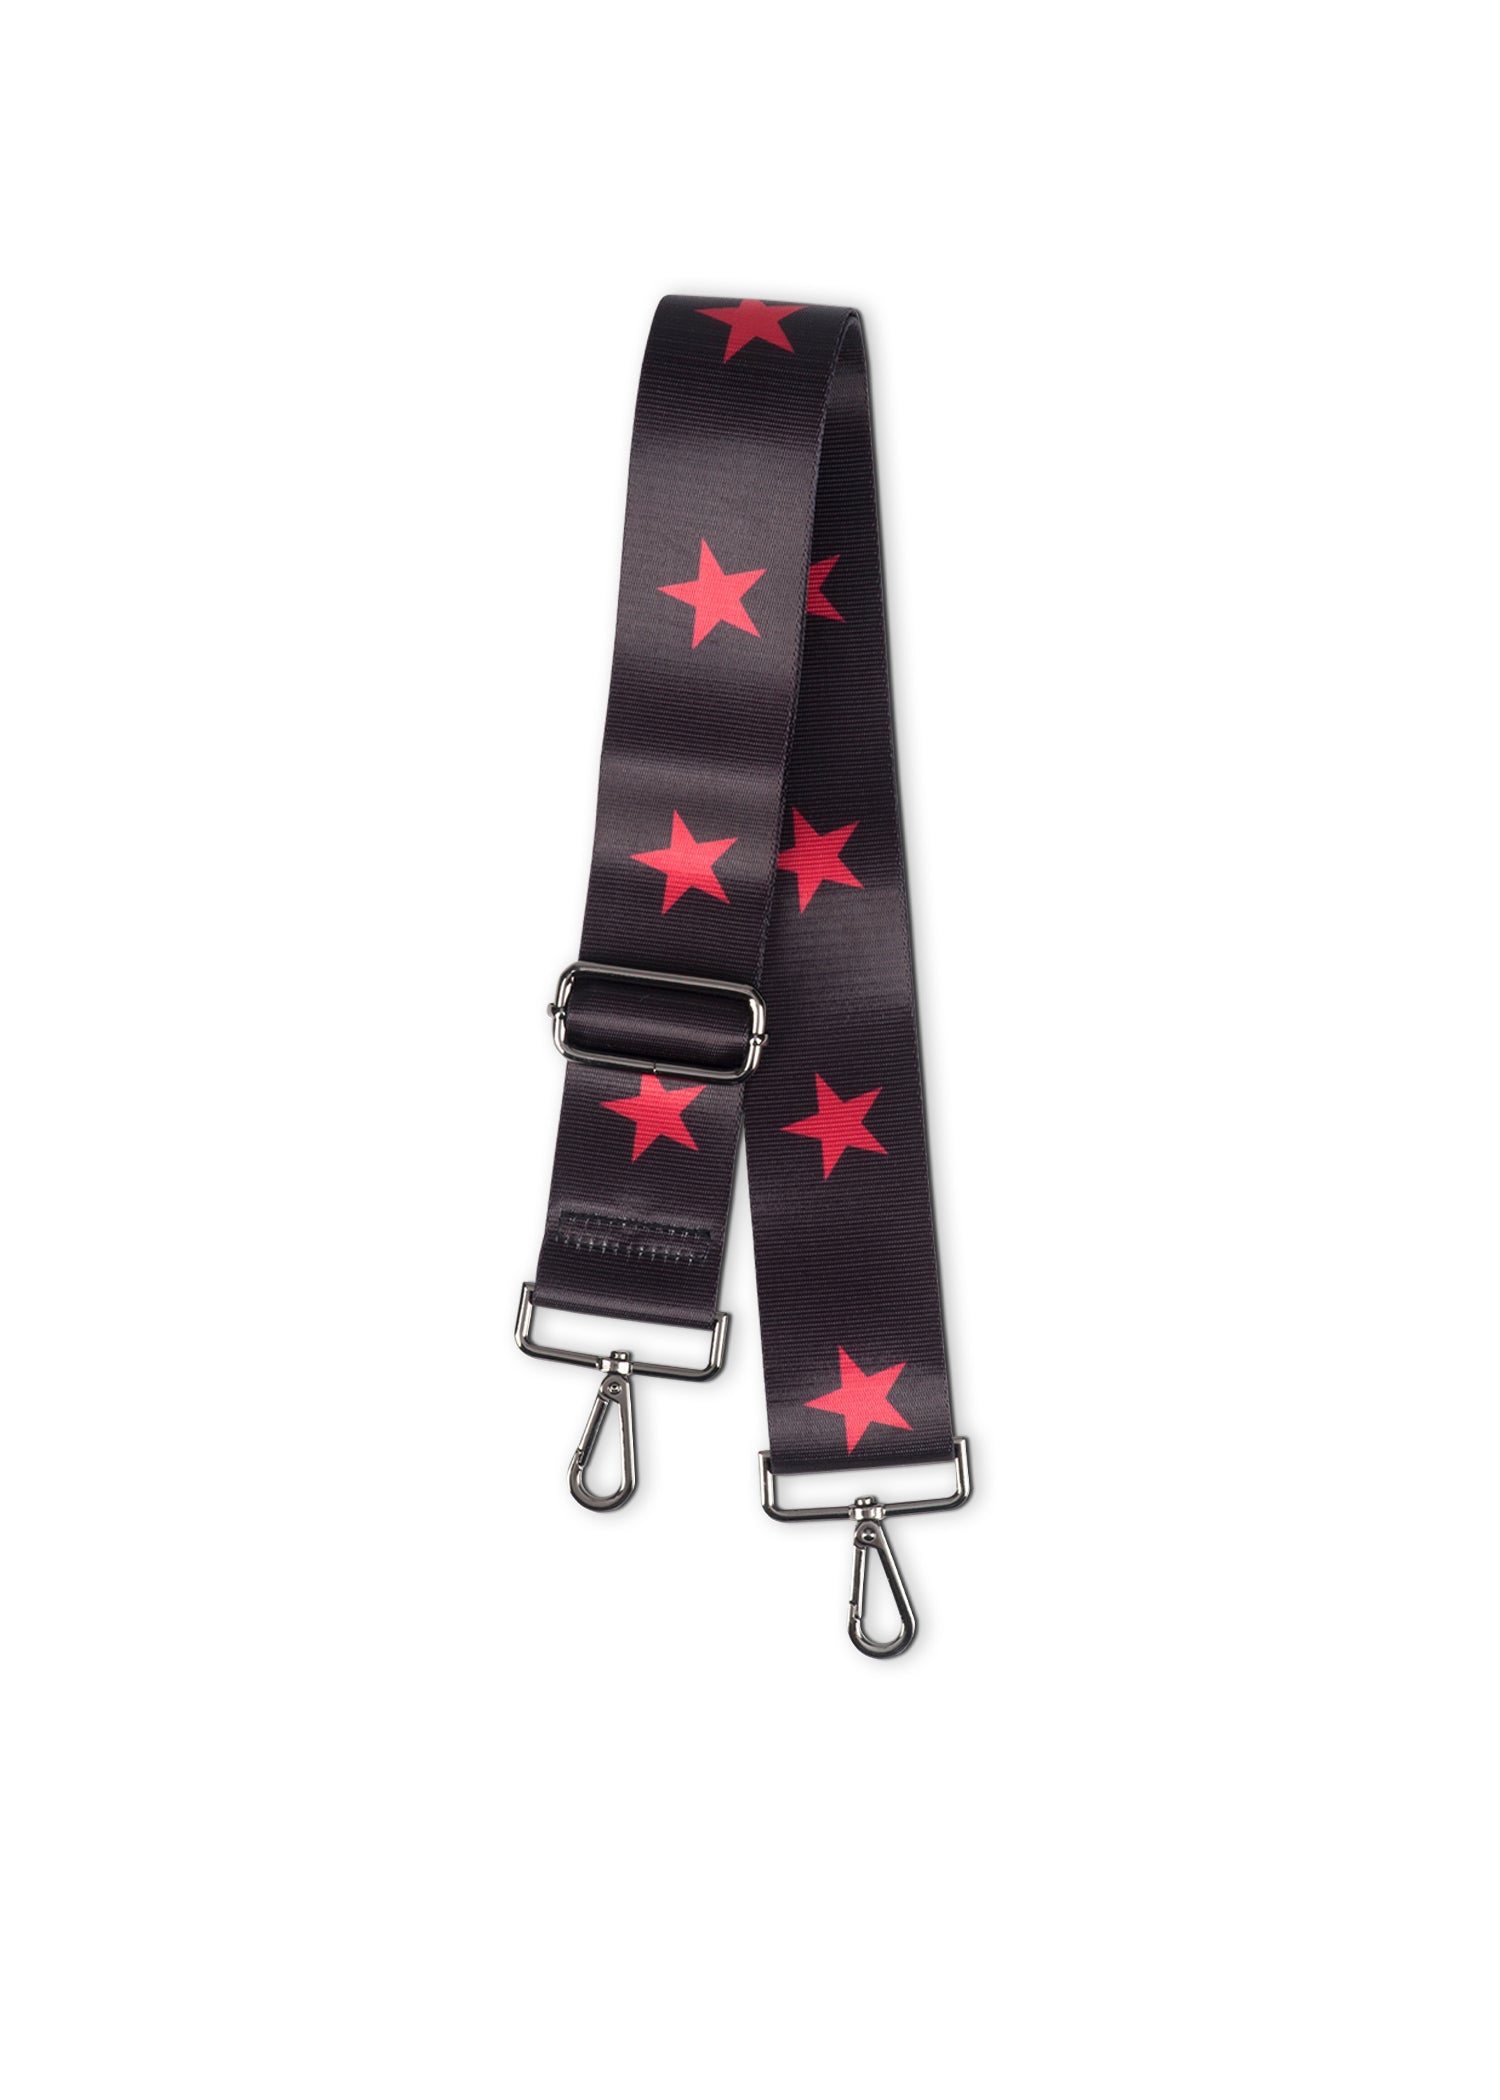 Star Beaded Bag Strap - Red and Black — The Horseshoe Crab